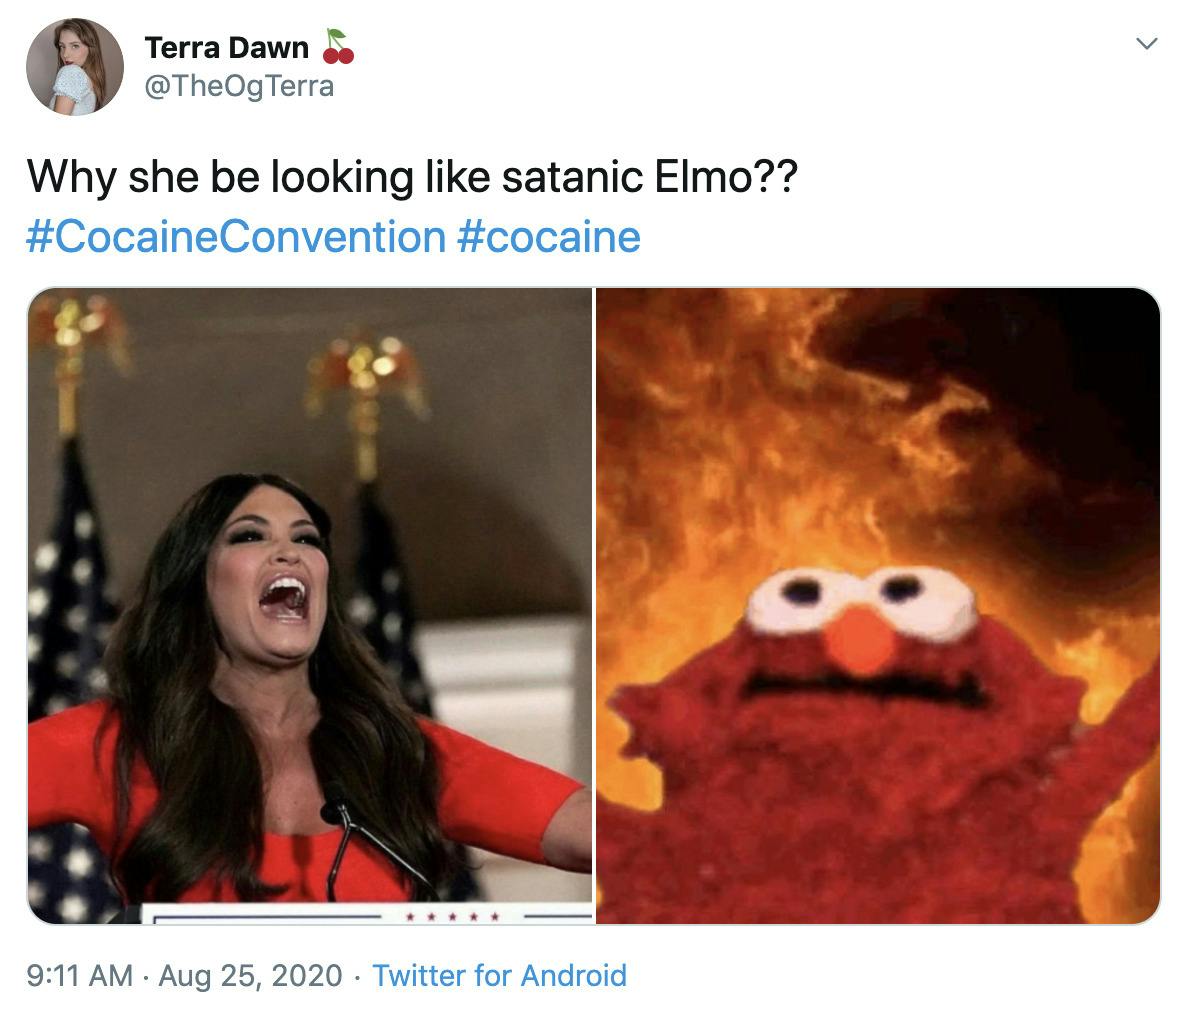 "Why she be looking like satanic Elmo?? #CocaineConvention #cocaine" Image of Guilfoyle next to the Elmo against the backdrop of flames meme